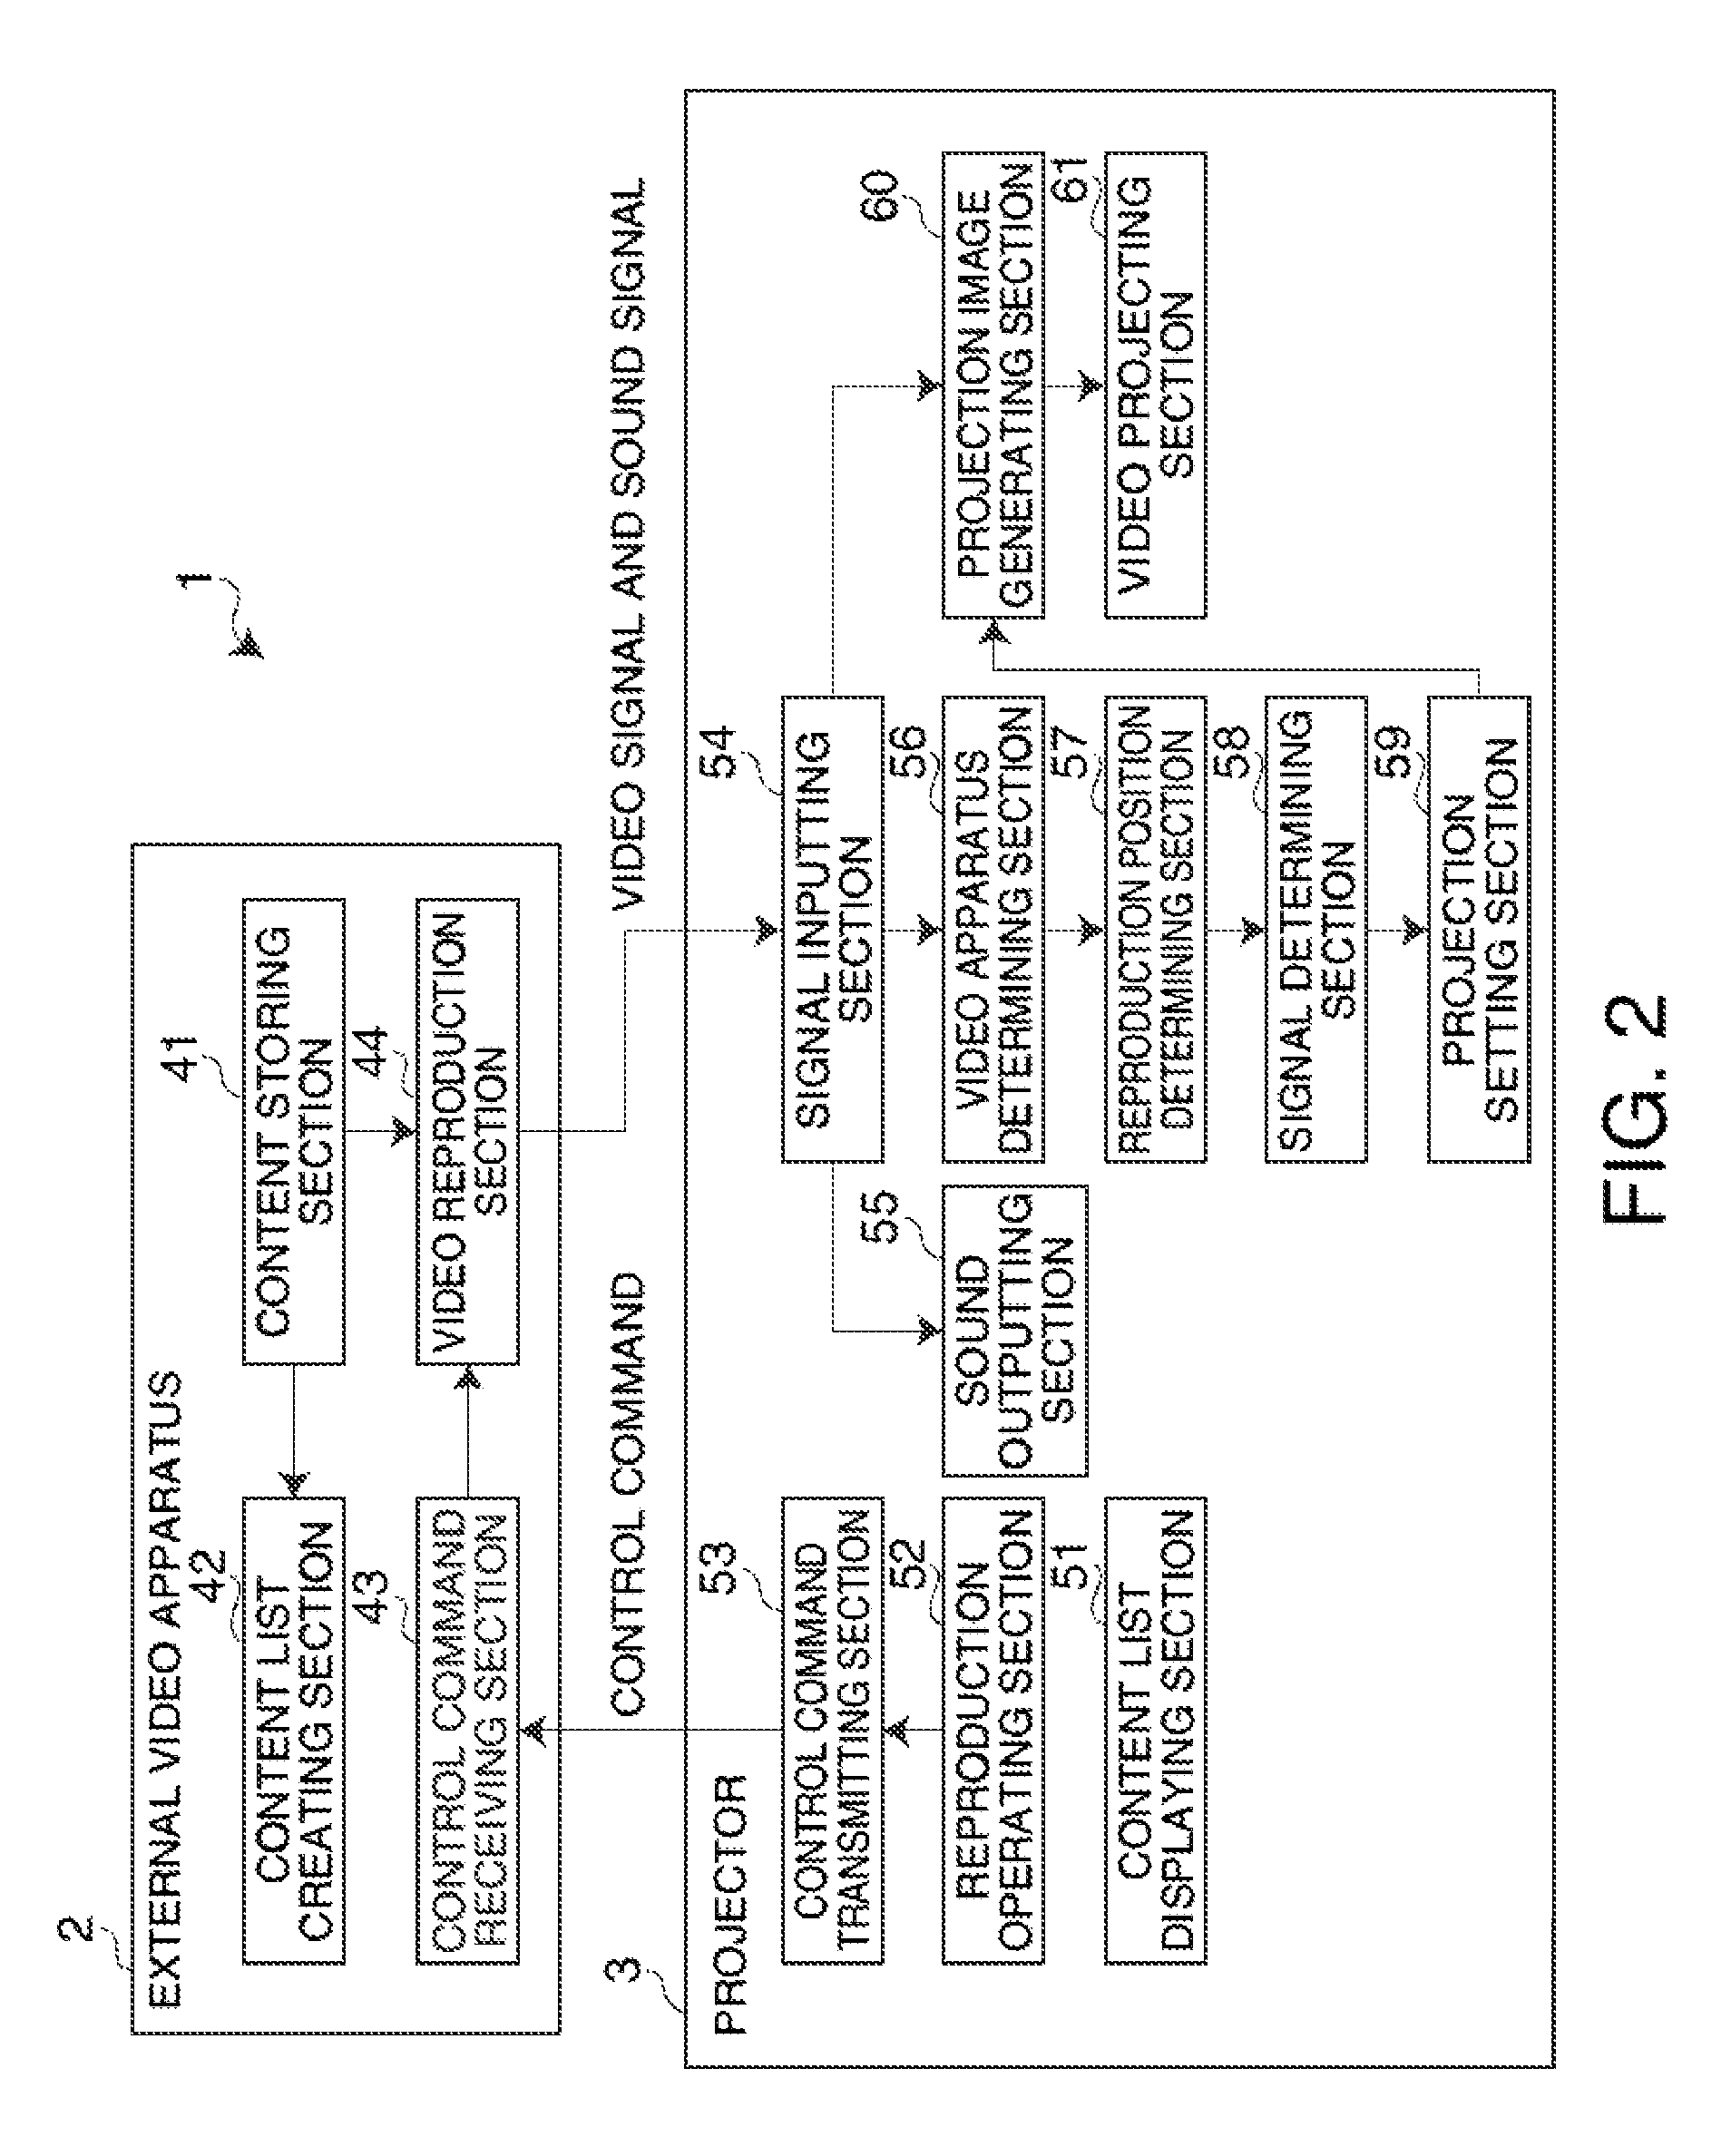 Display device and method for controlling the display device